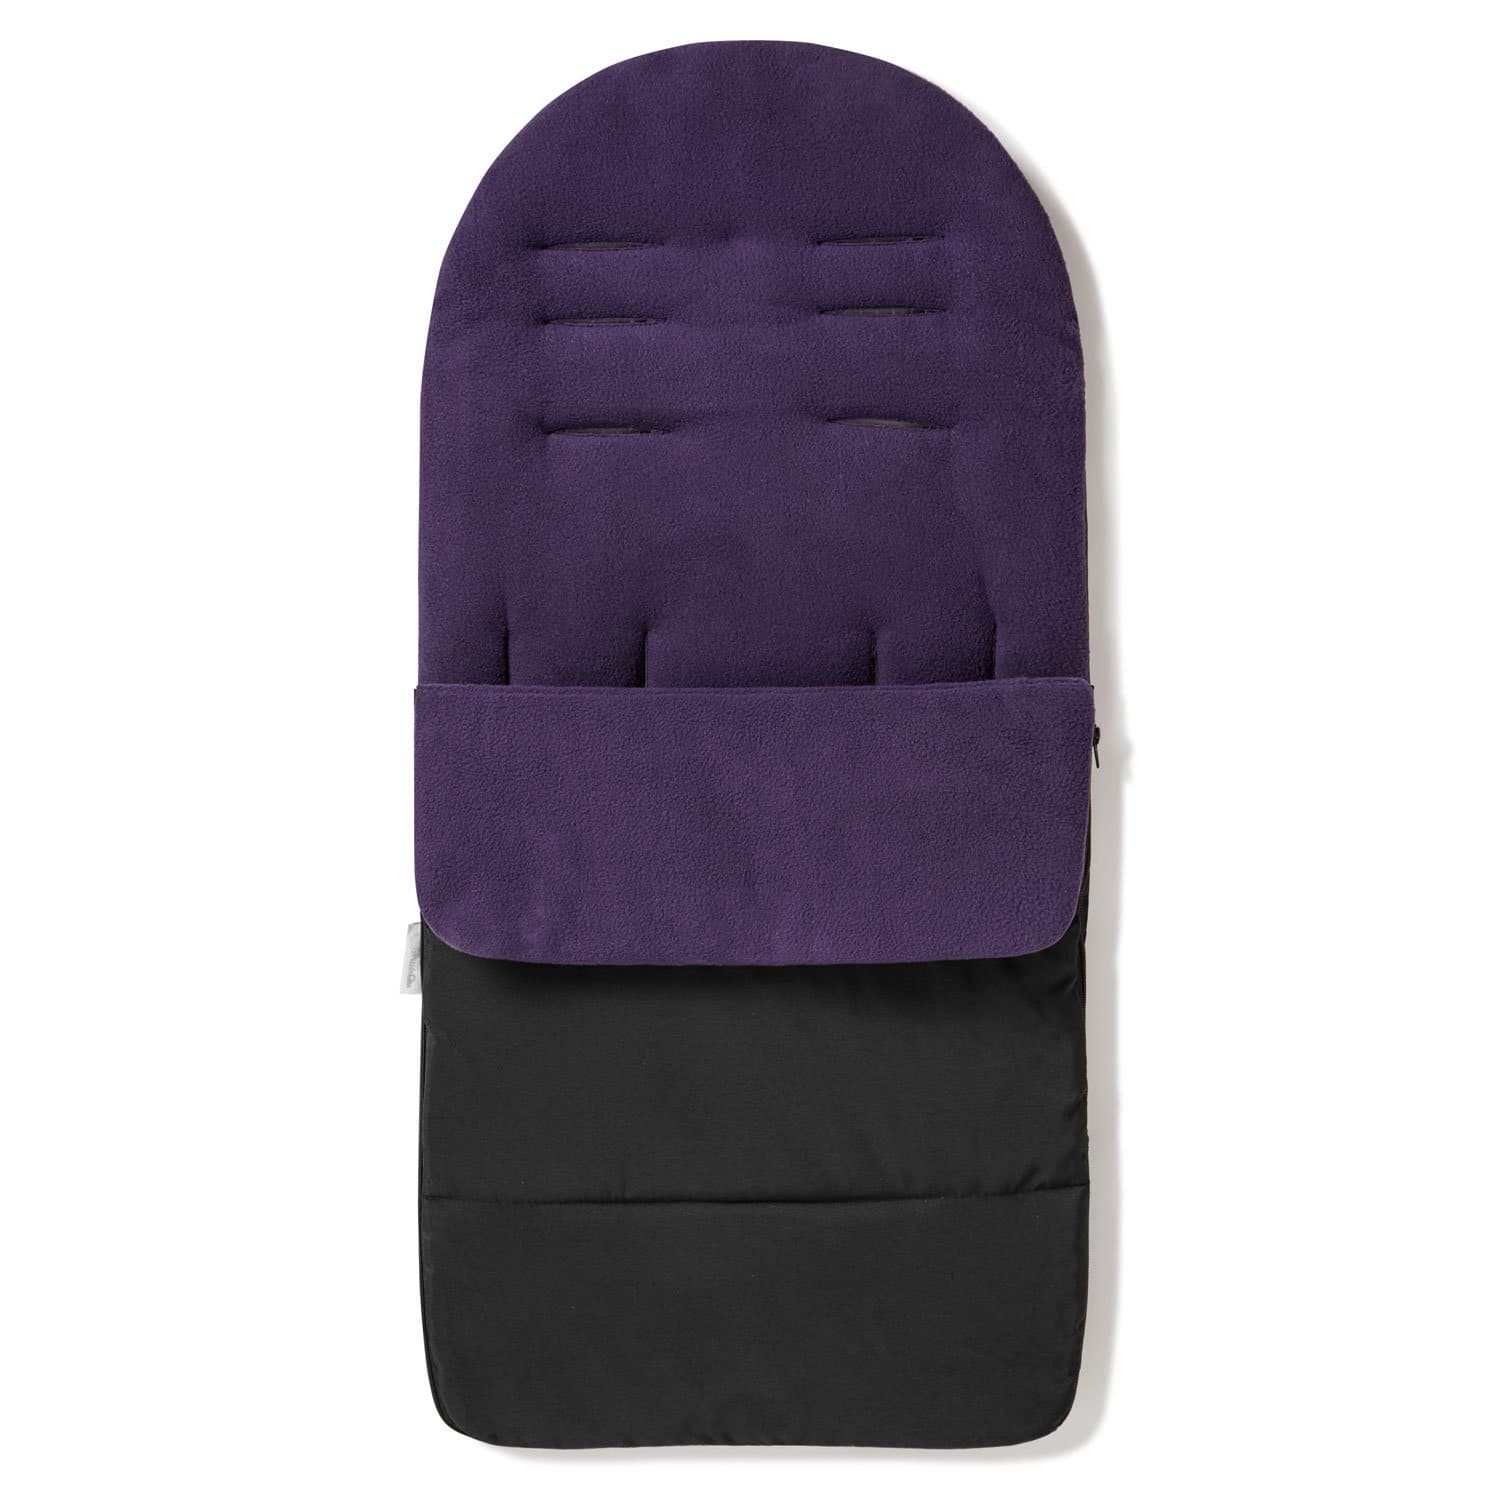 Premium Footmuff / Cosy Toes Compatible with Hybrid - Plum Purple / Fits All Models | For Your Little One